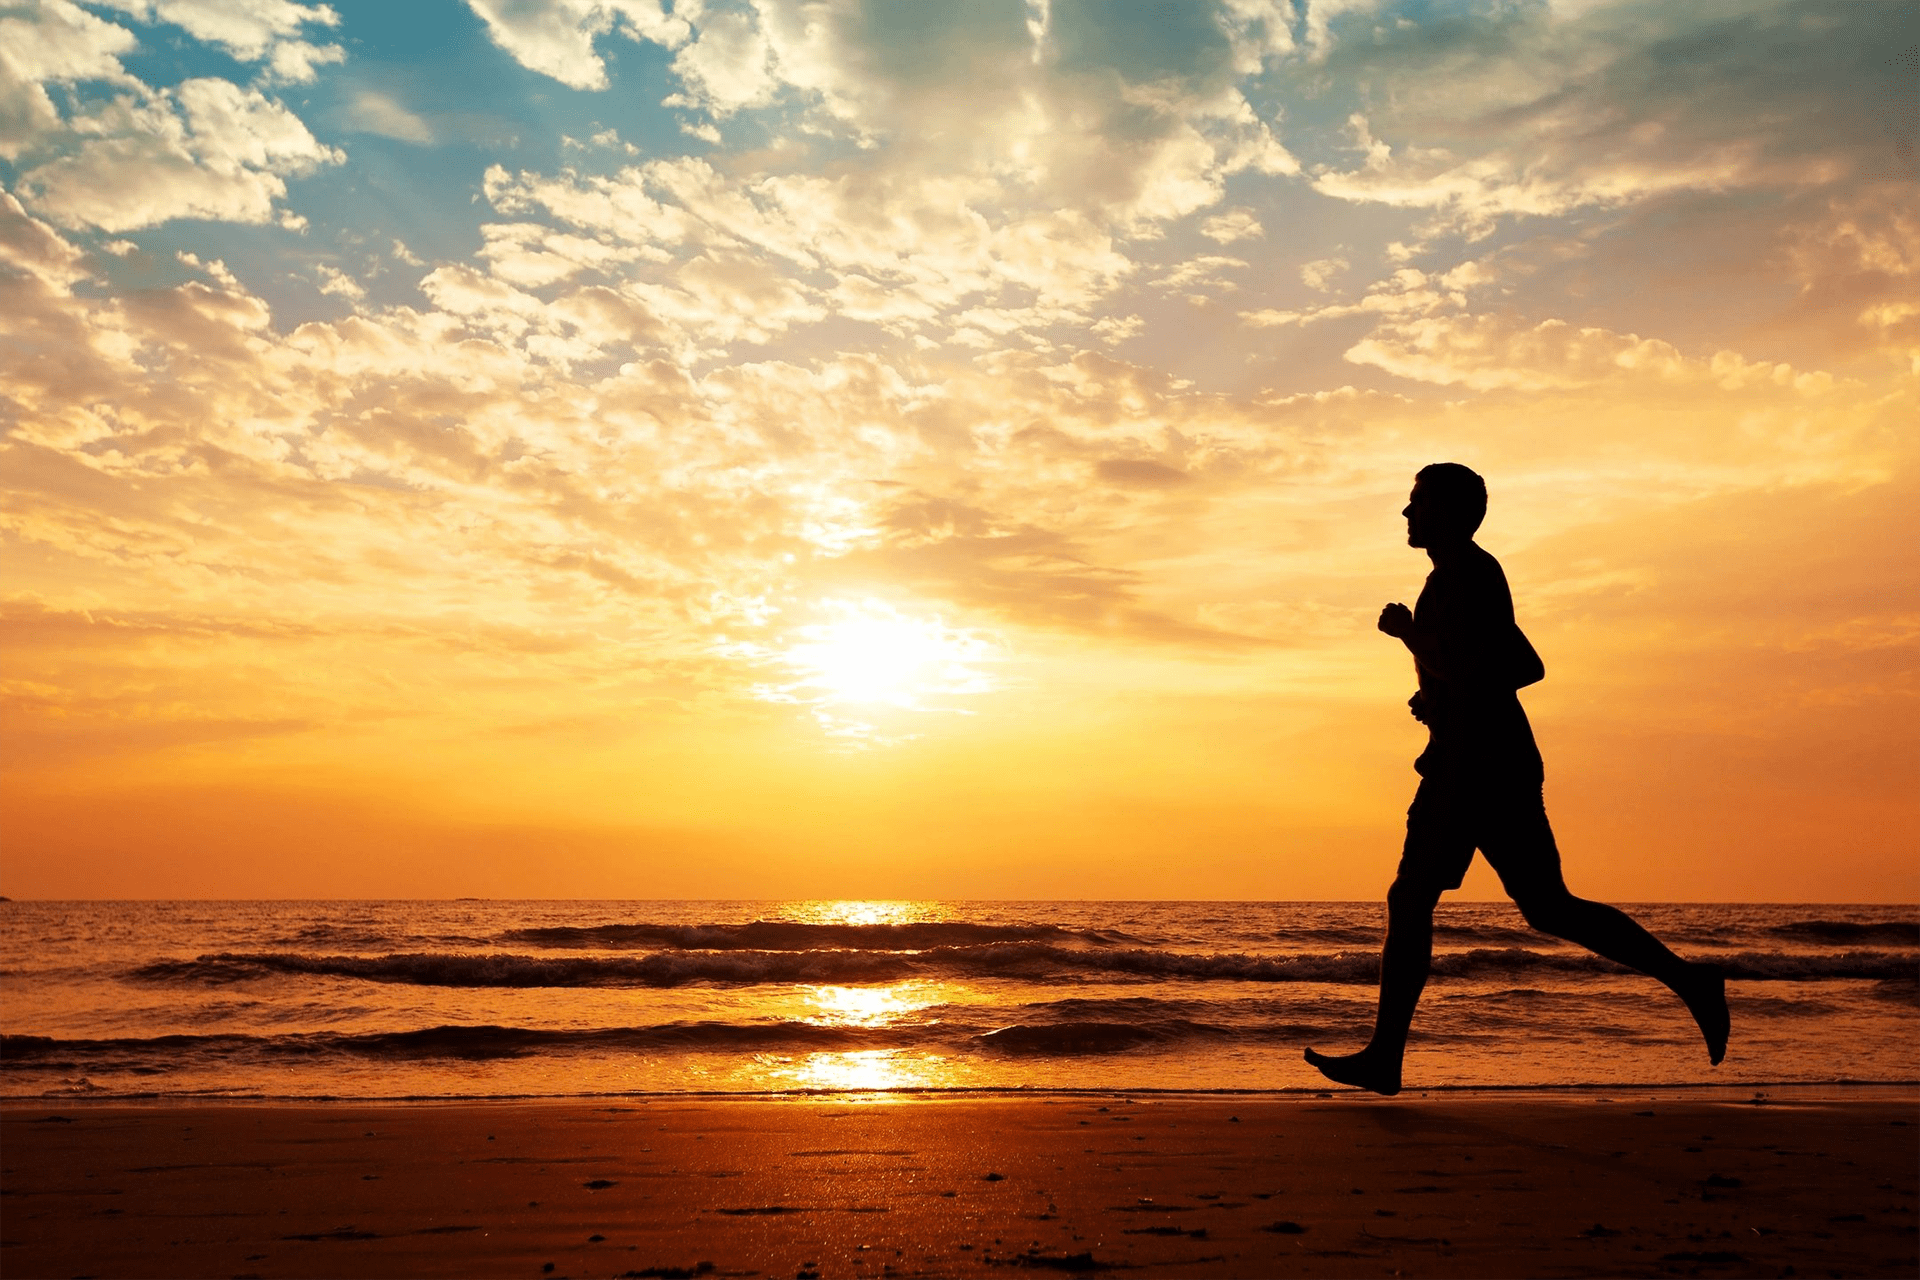 A man running on the beach at sunset.